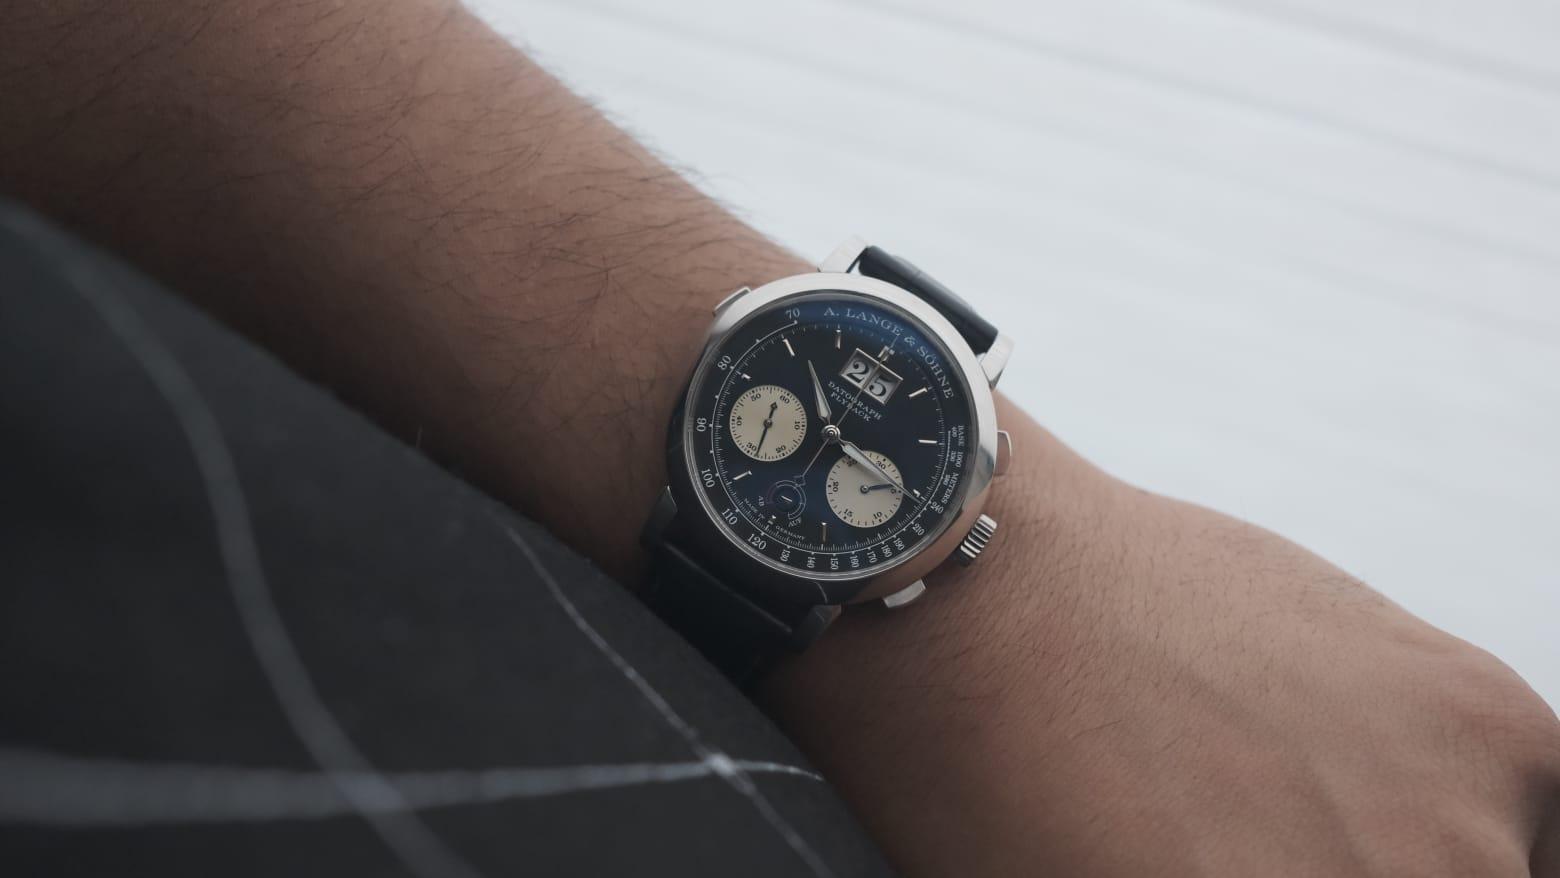 A. Lange & Söhne Datograph Platinum 405.035 featured on the wrist.